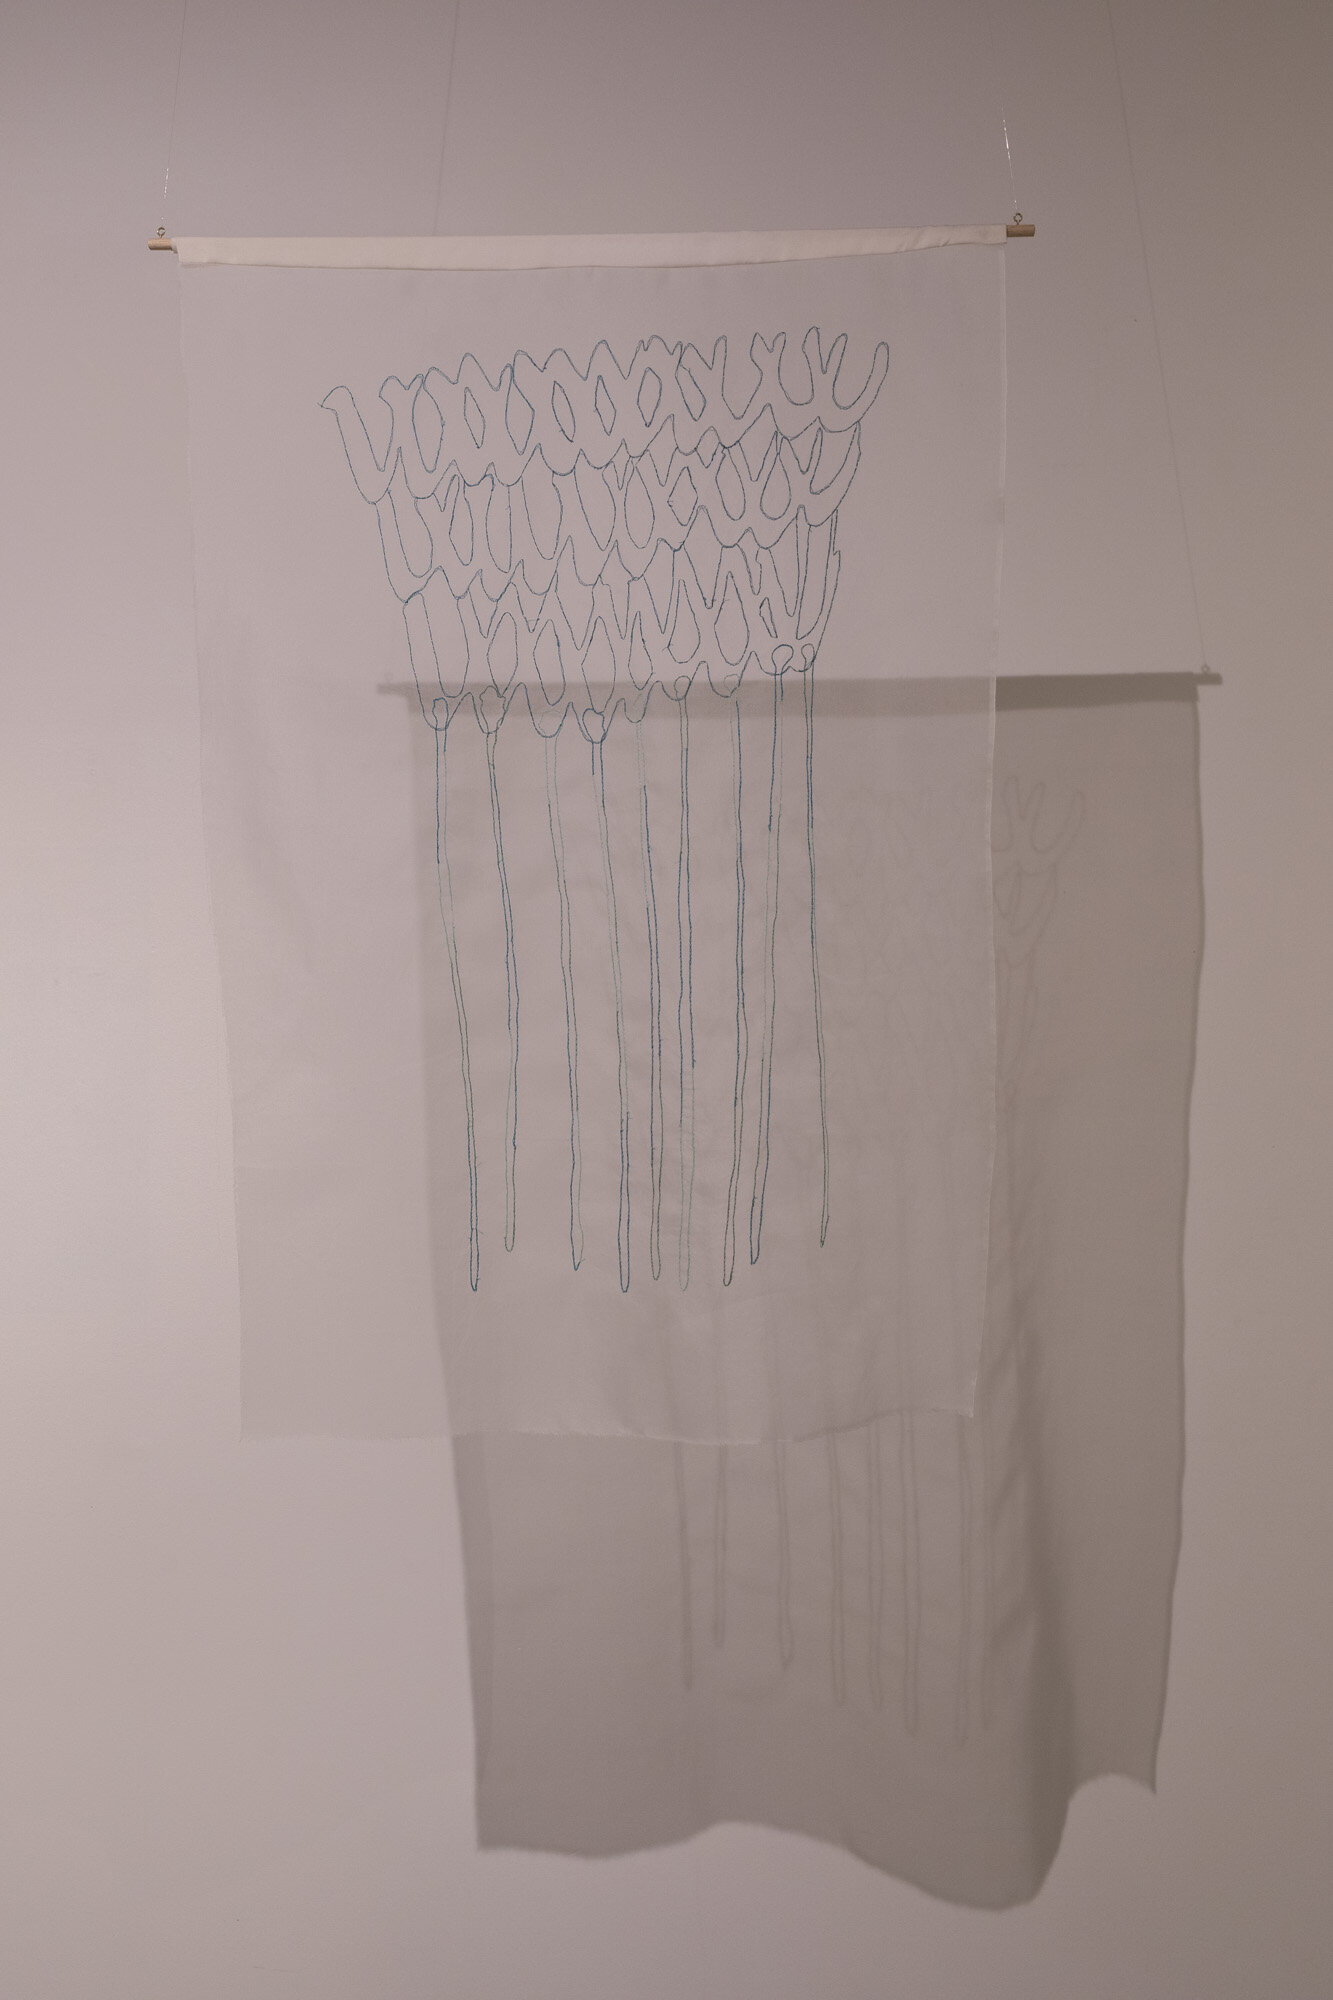   she’s lost in a reverie  cotton hand embroidery on silk organza, 70cm x 100cm June 2021 AIRspace Projects  Image:  Joy M Lai   